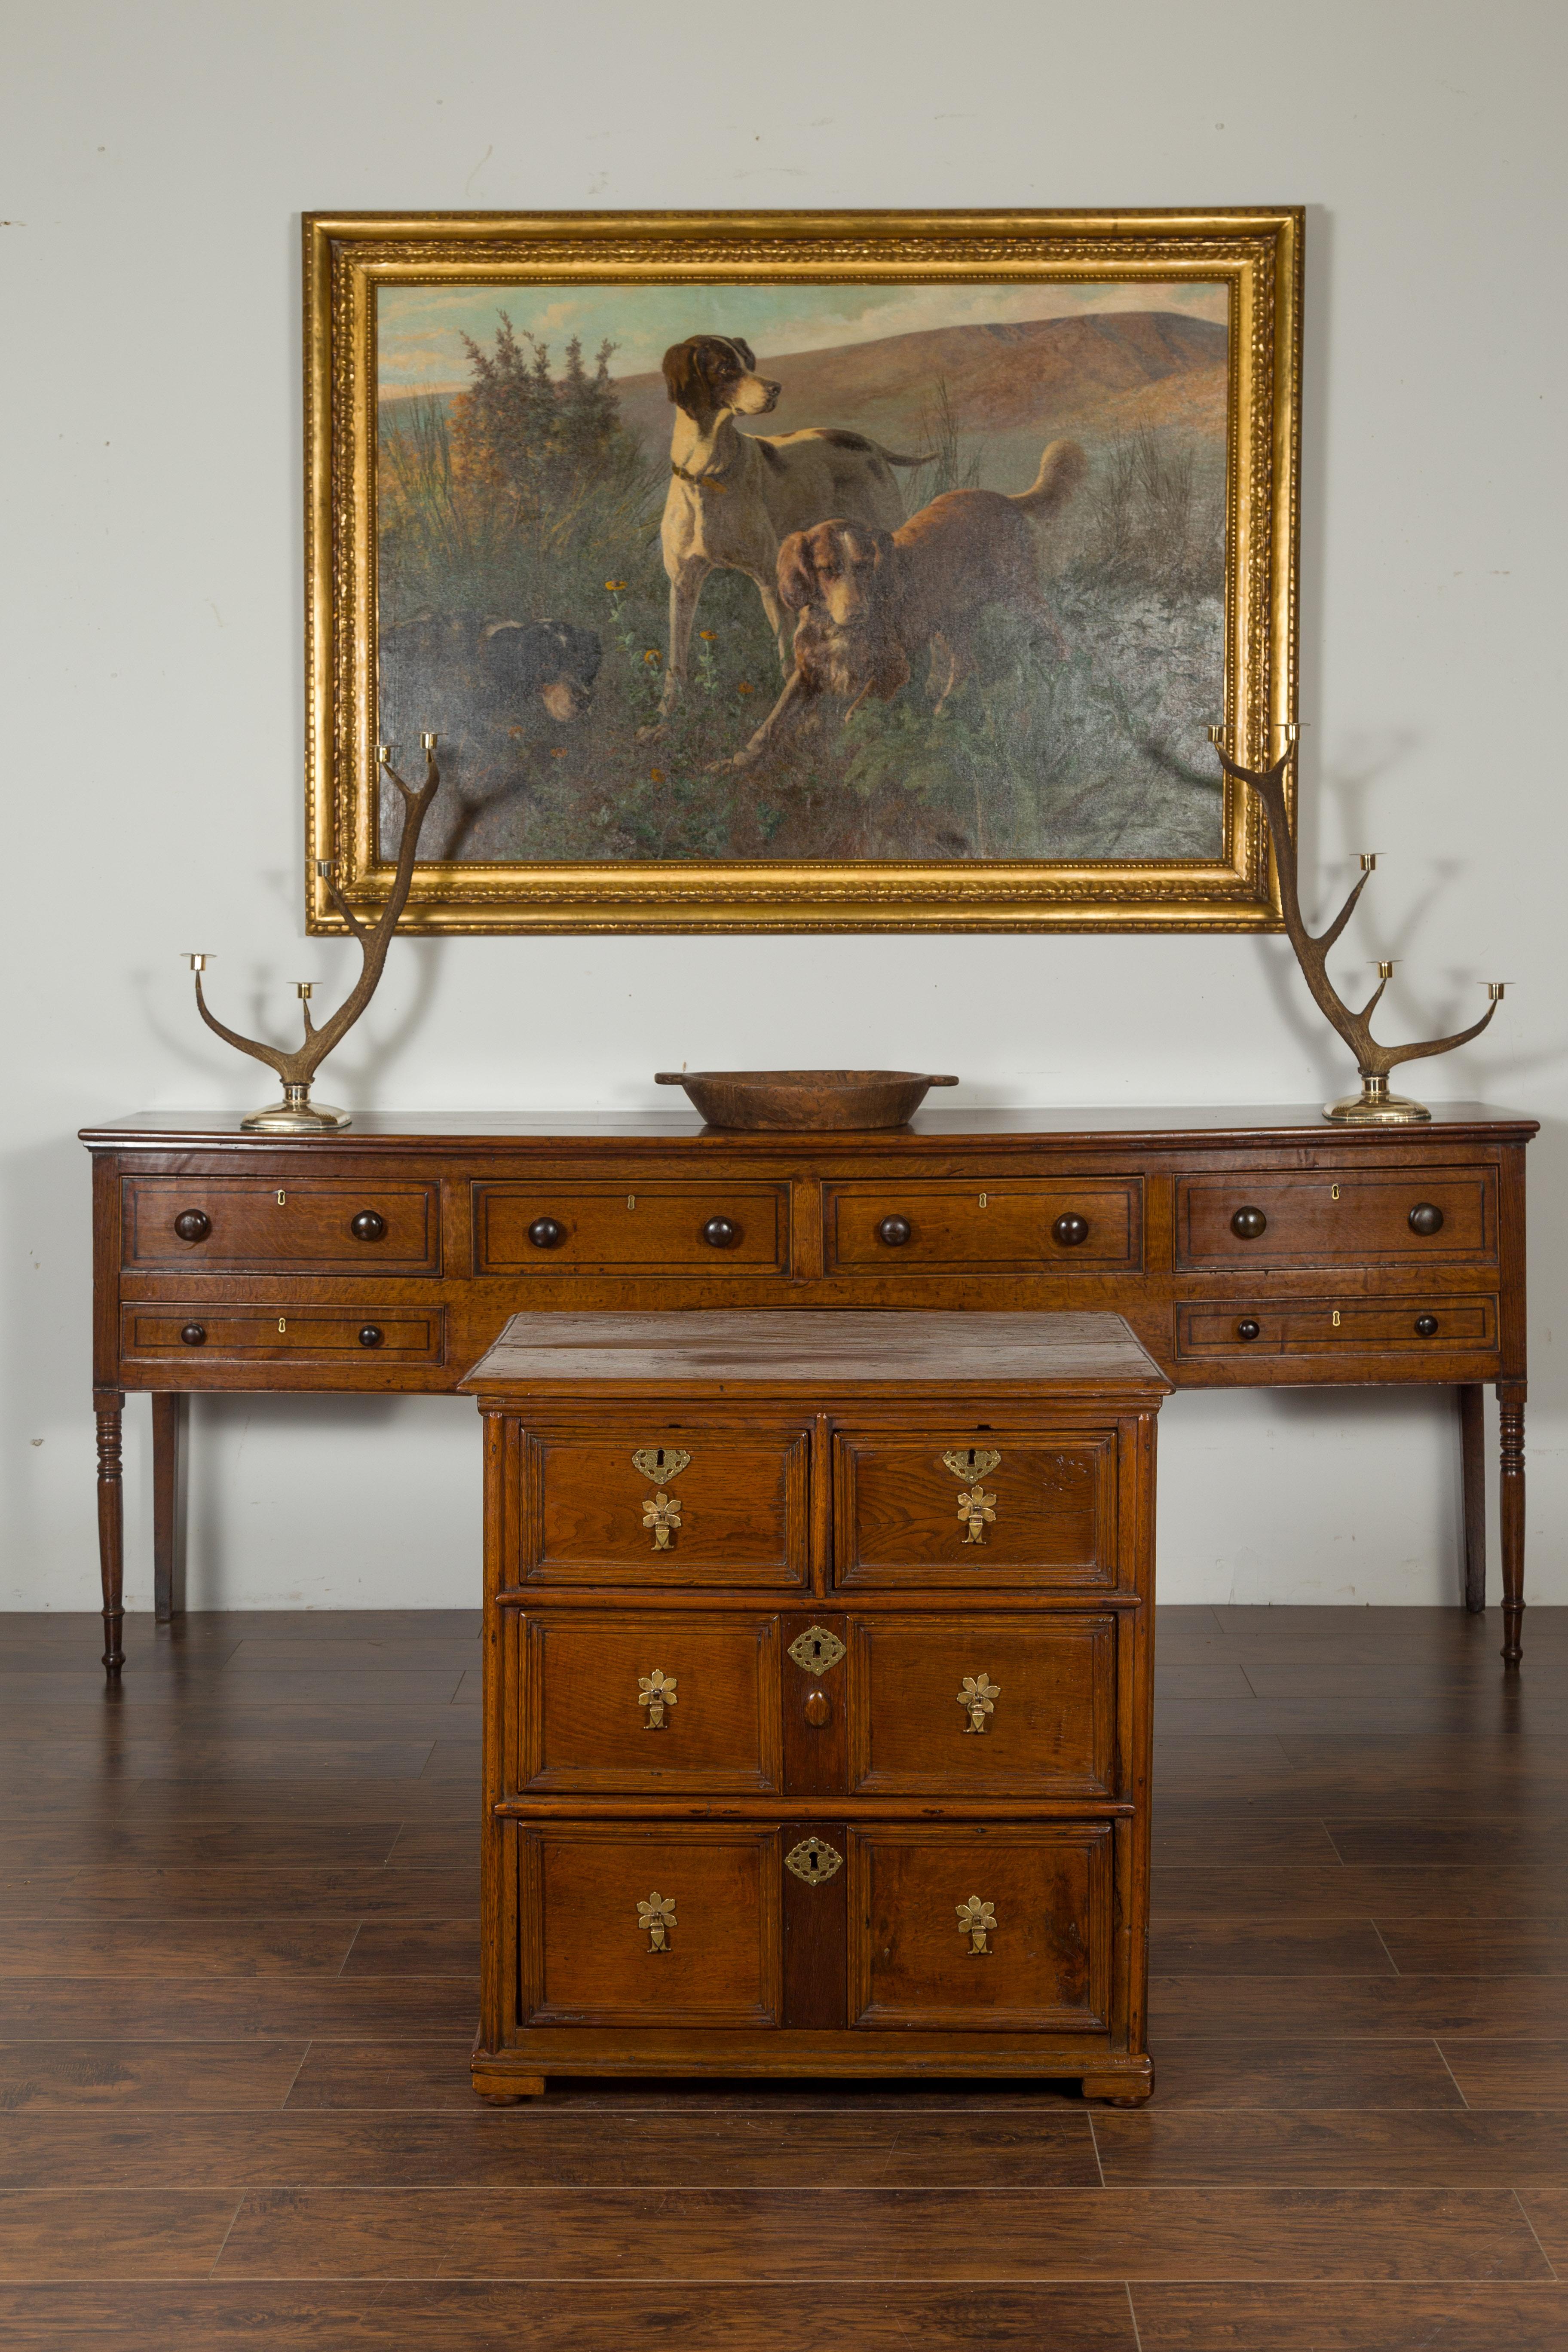 An English Georgian period oak four-drawer chest from the early 19th century, with floral brass hardware. Created in England during the first quarter of the 19th century, this Georgian oak chest features a rectangular top with beveled edges, sitting